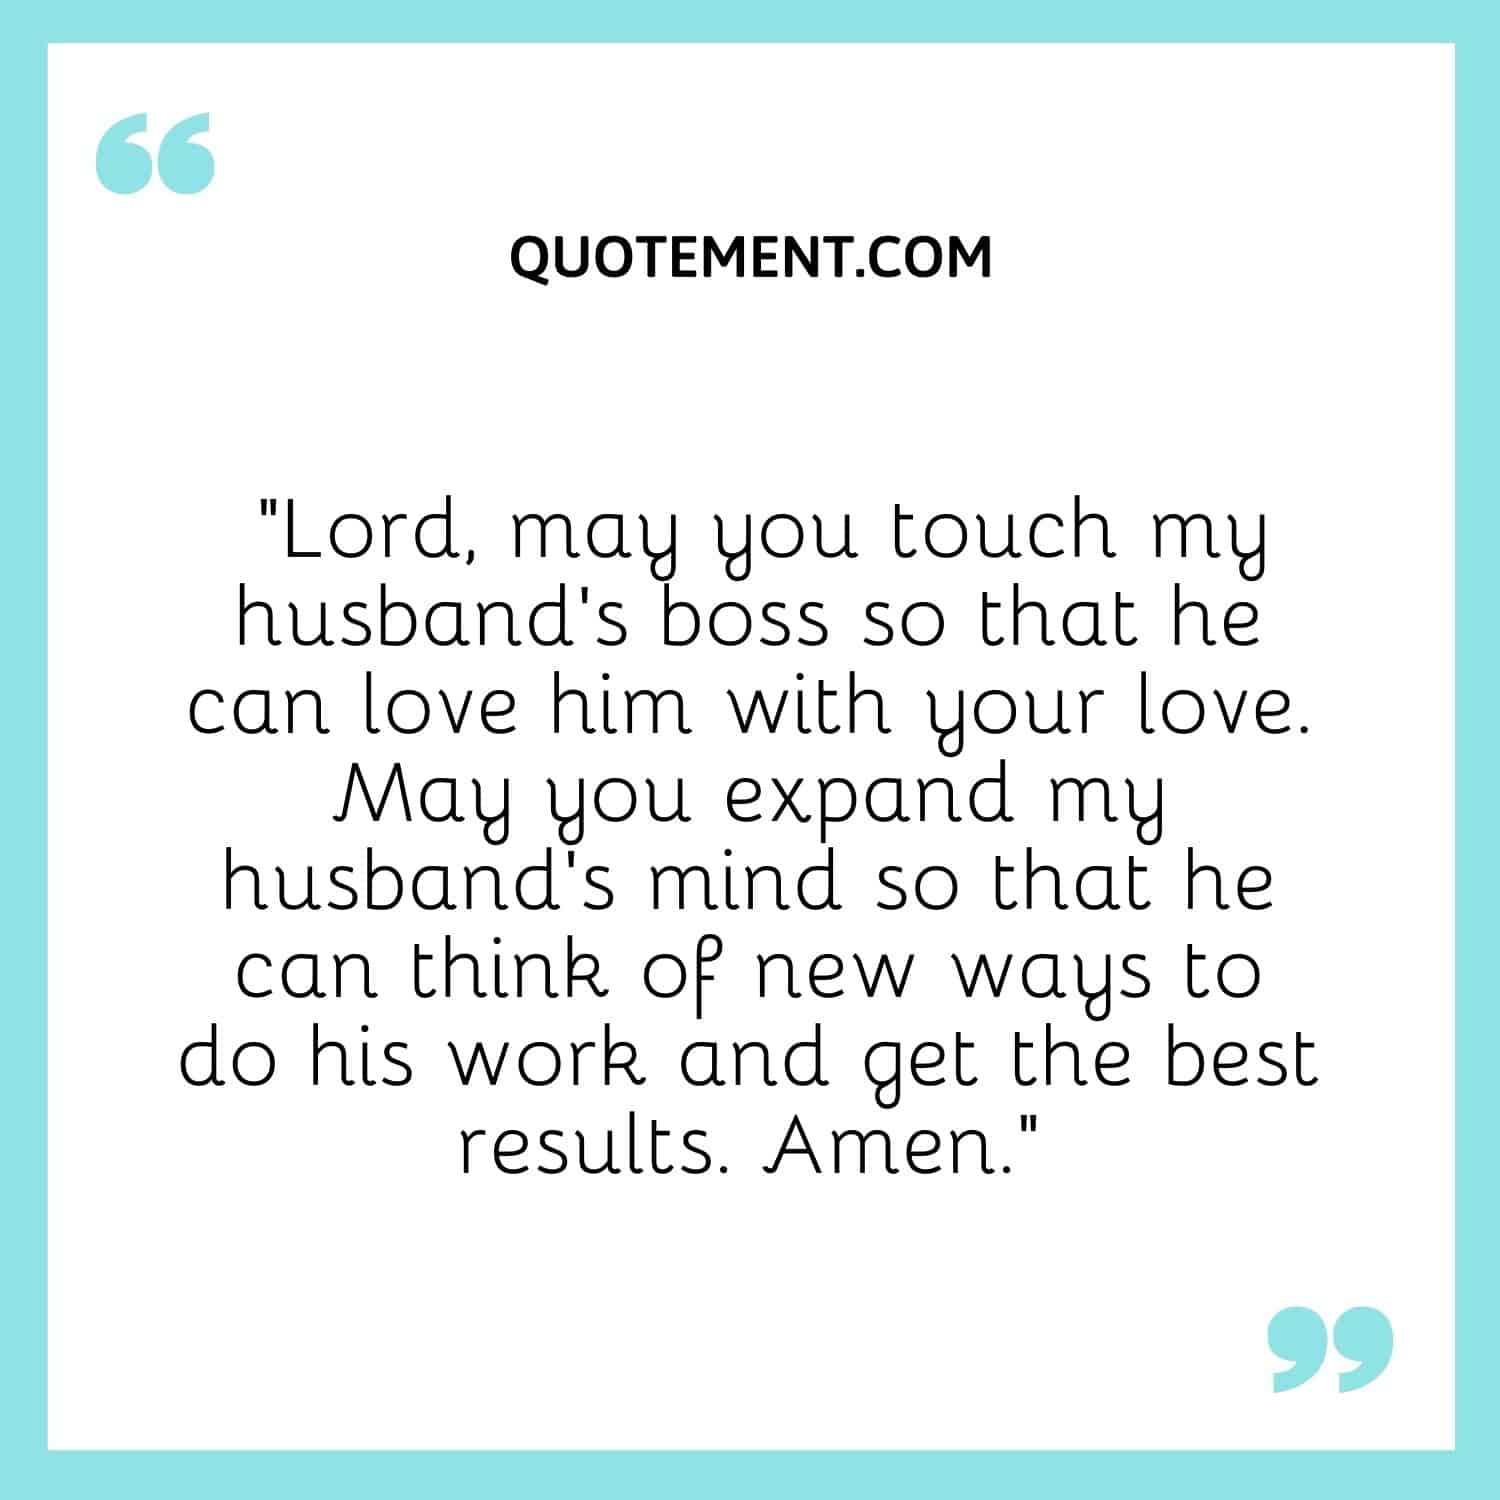 Lord, may you touch my husband’s boss so that he can love him with your love